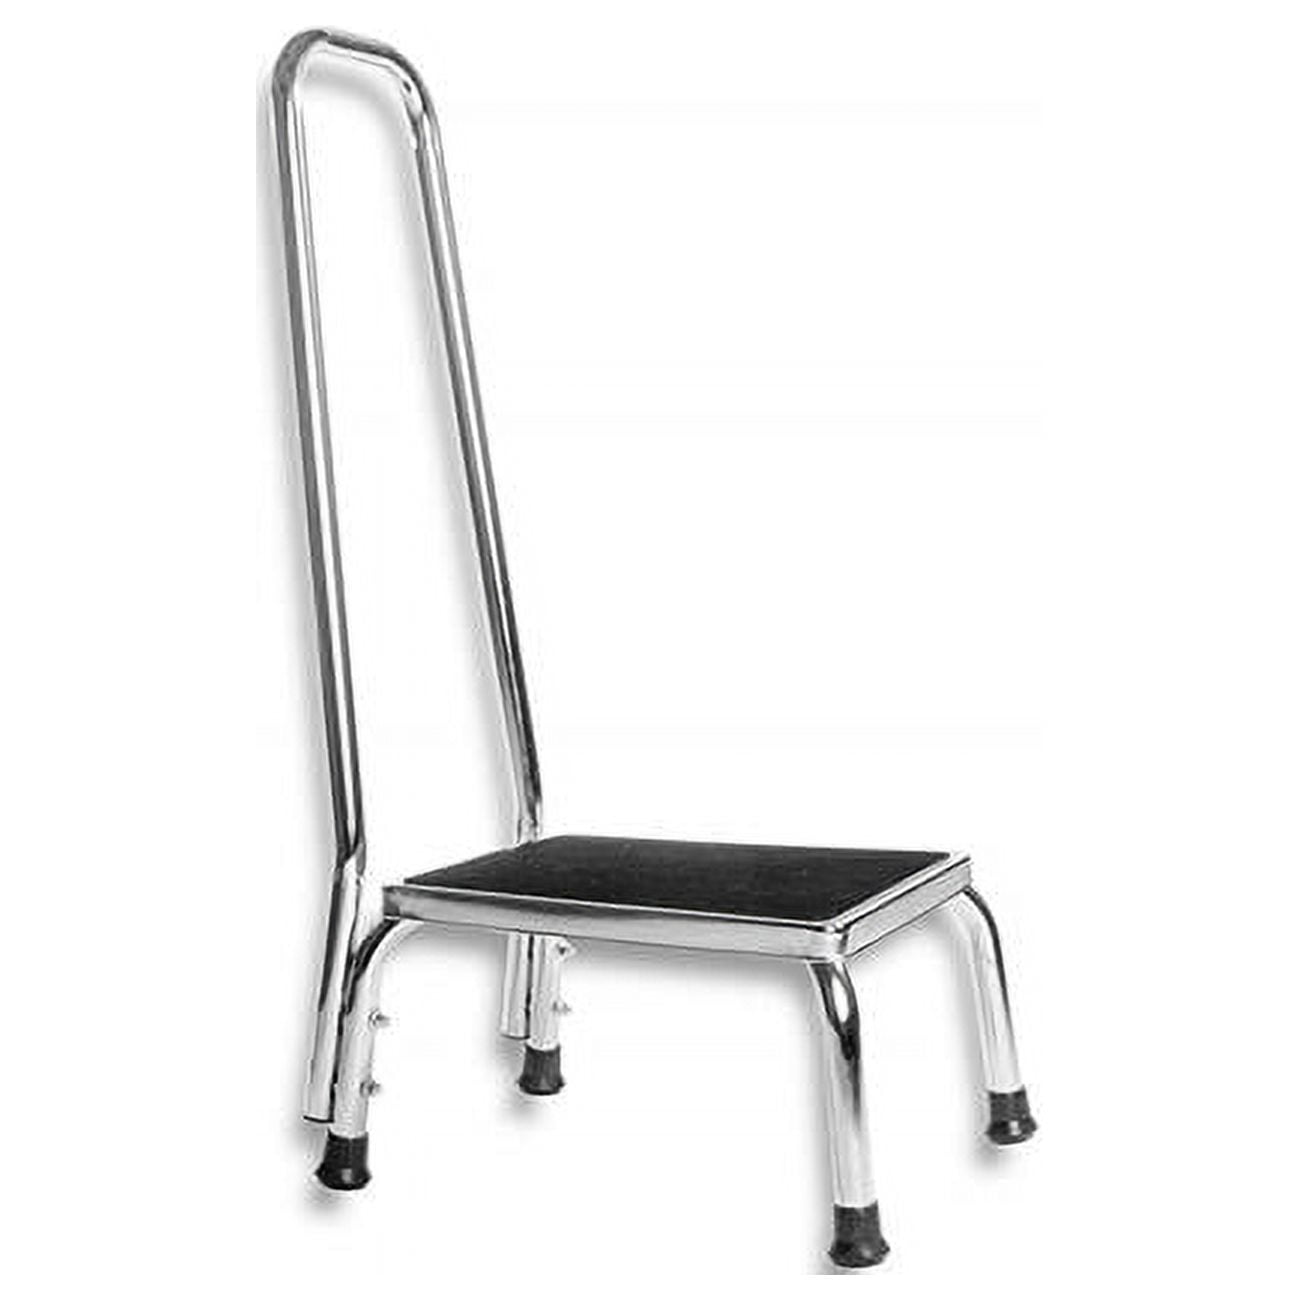 4348 Bariatric Foot Stool With Handrail, Chrome